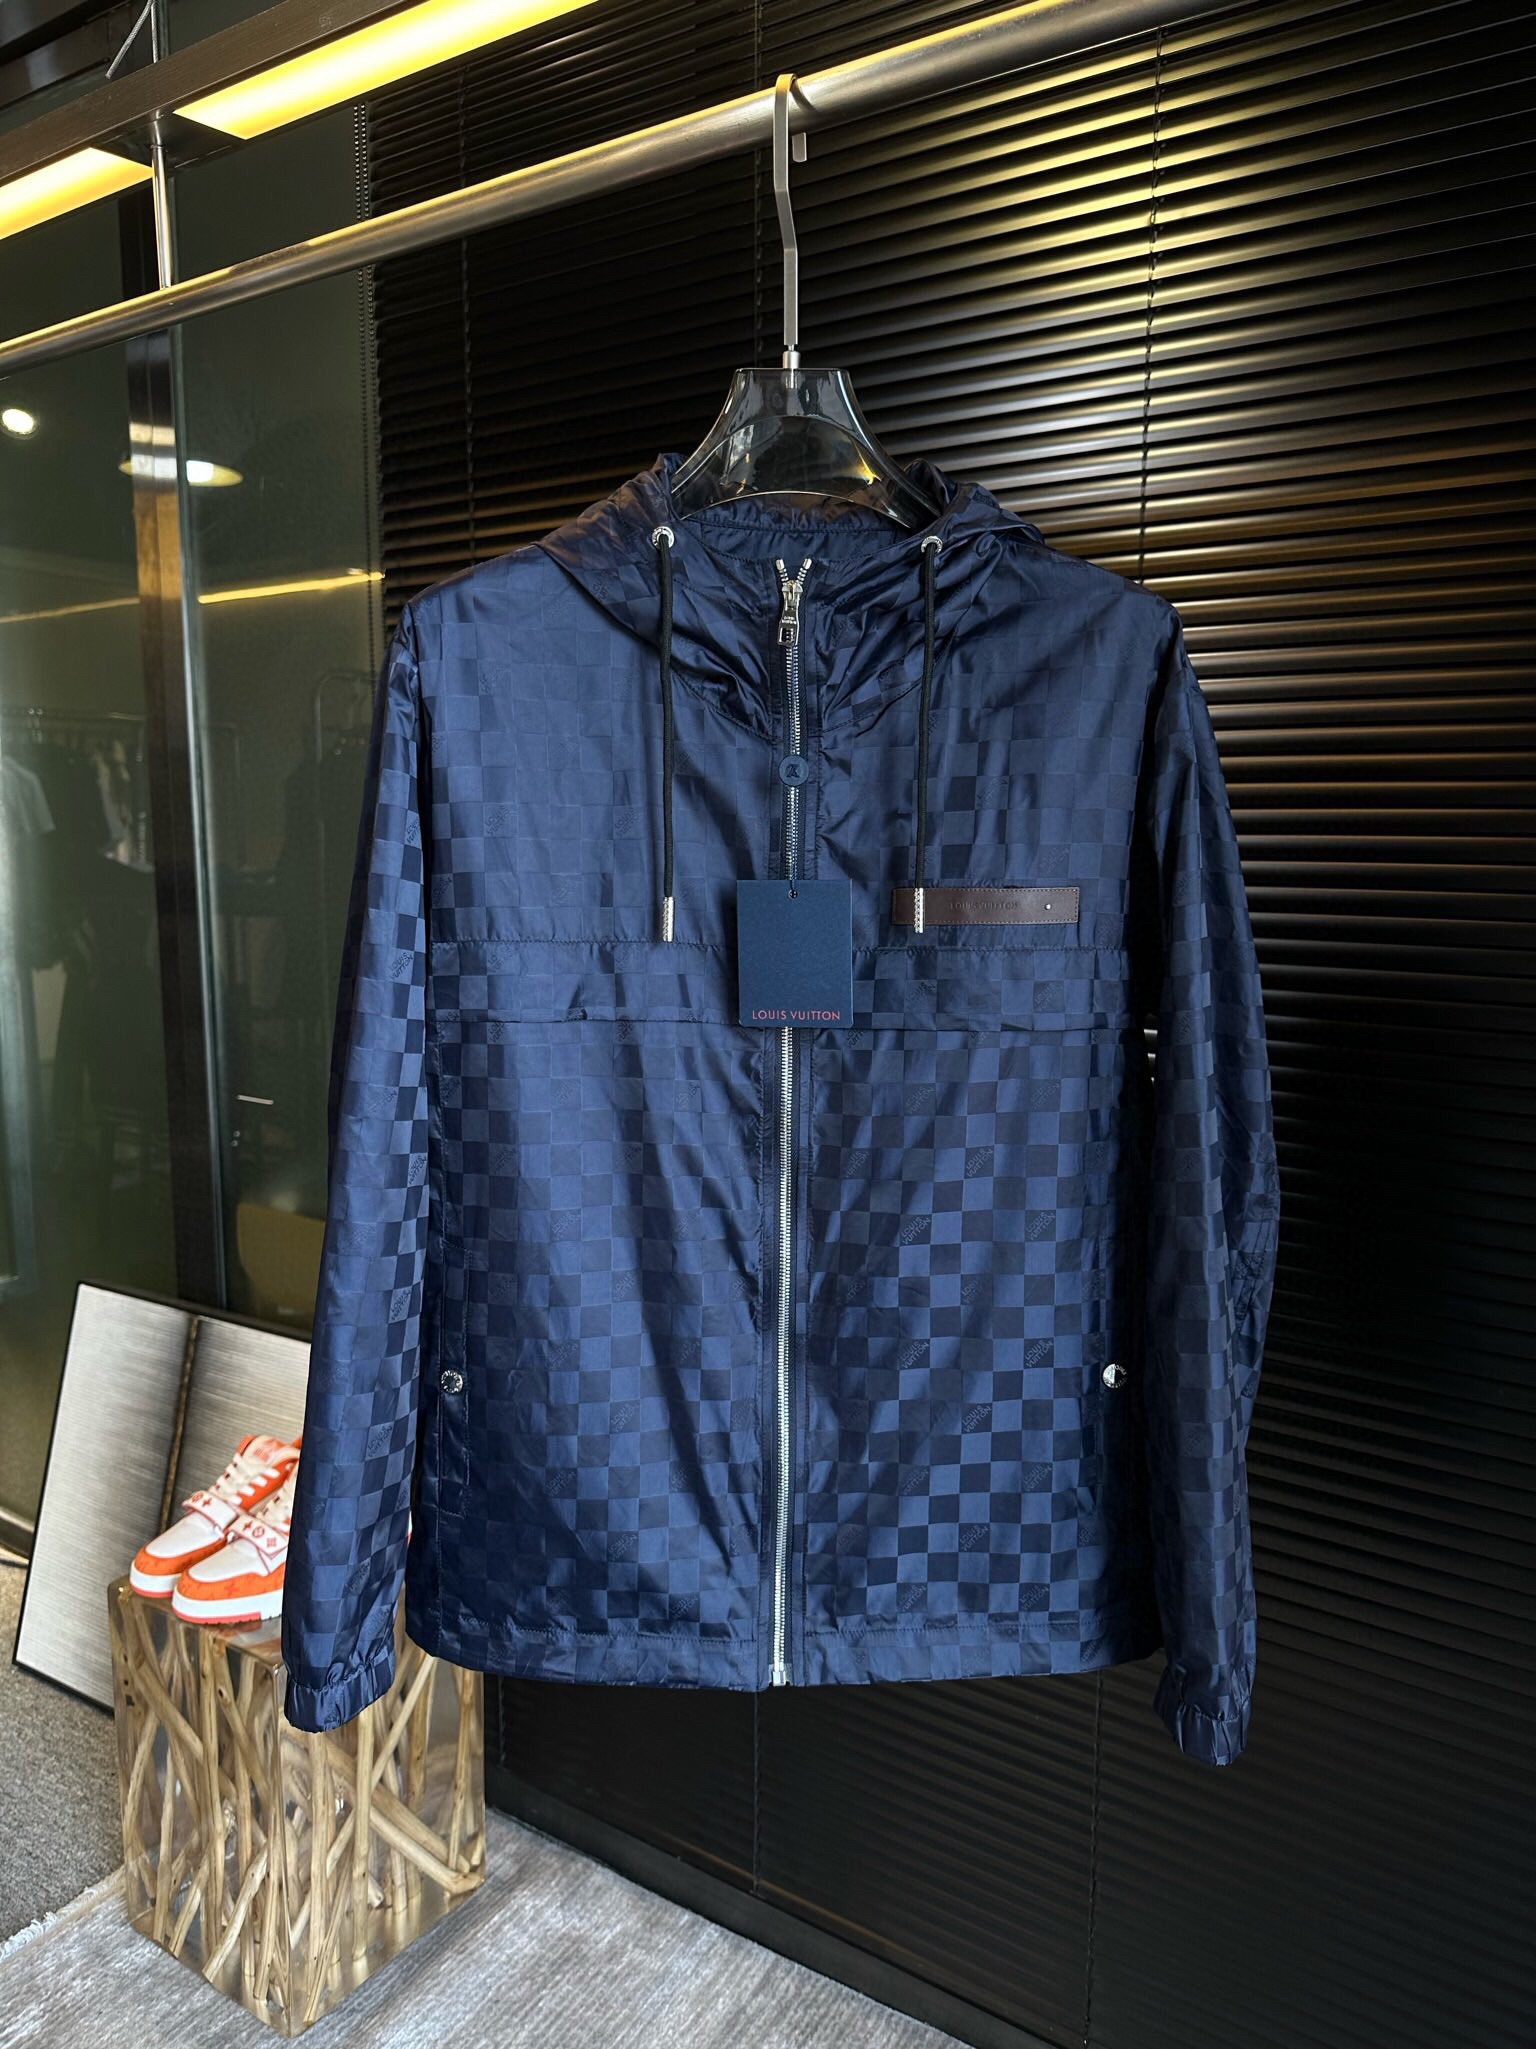 Louis Vuitton Clothing Coats & Jackets Black Blue Grey Spring/Summer Collection Fashion Hooded Top